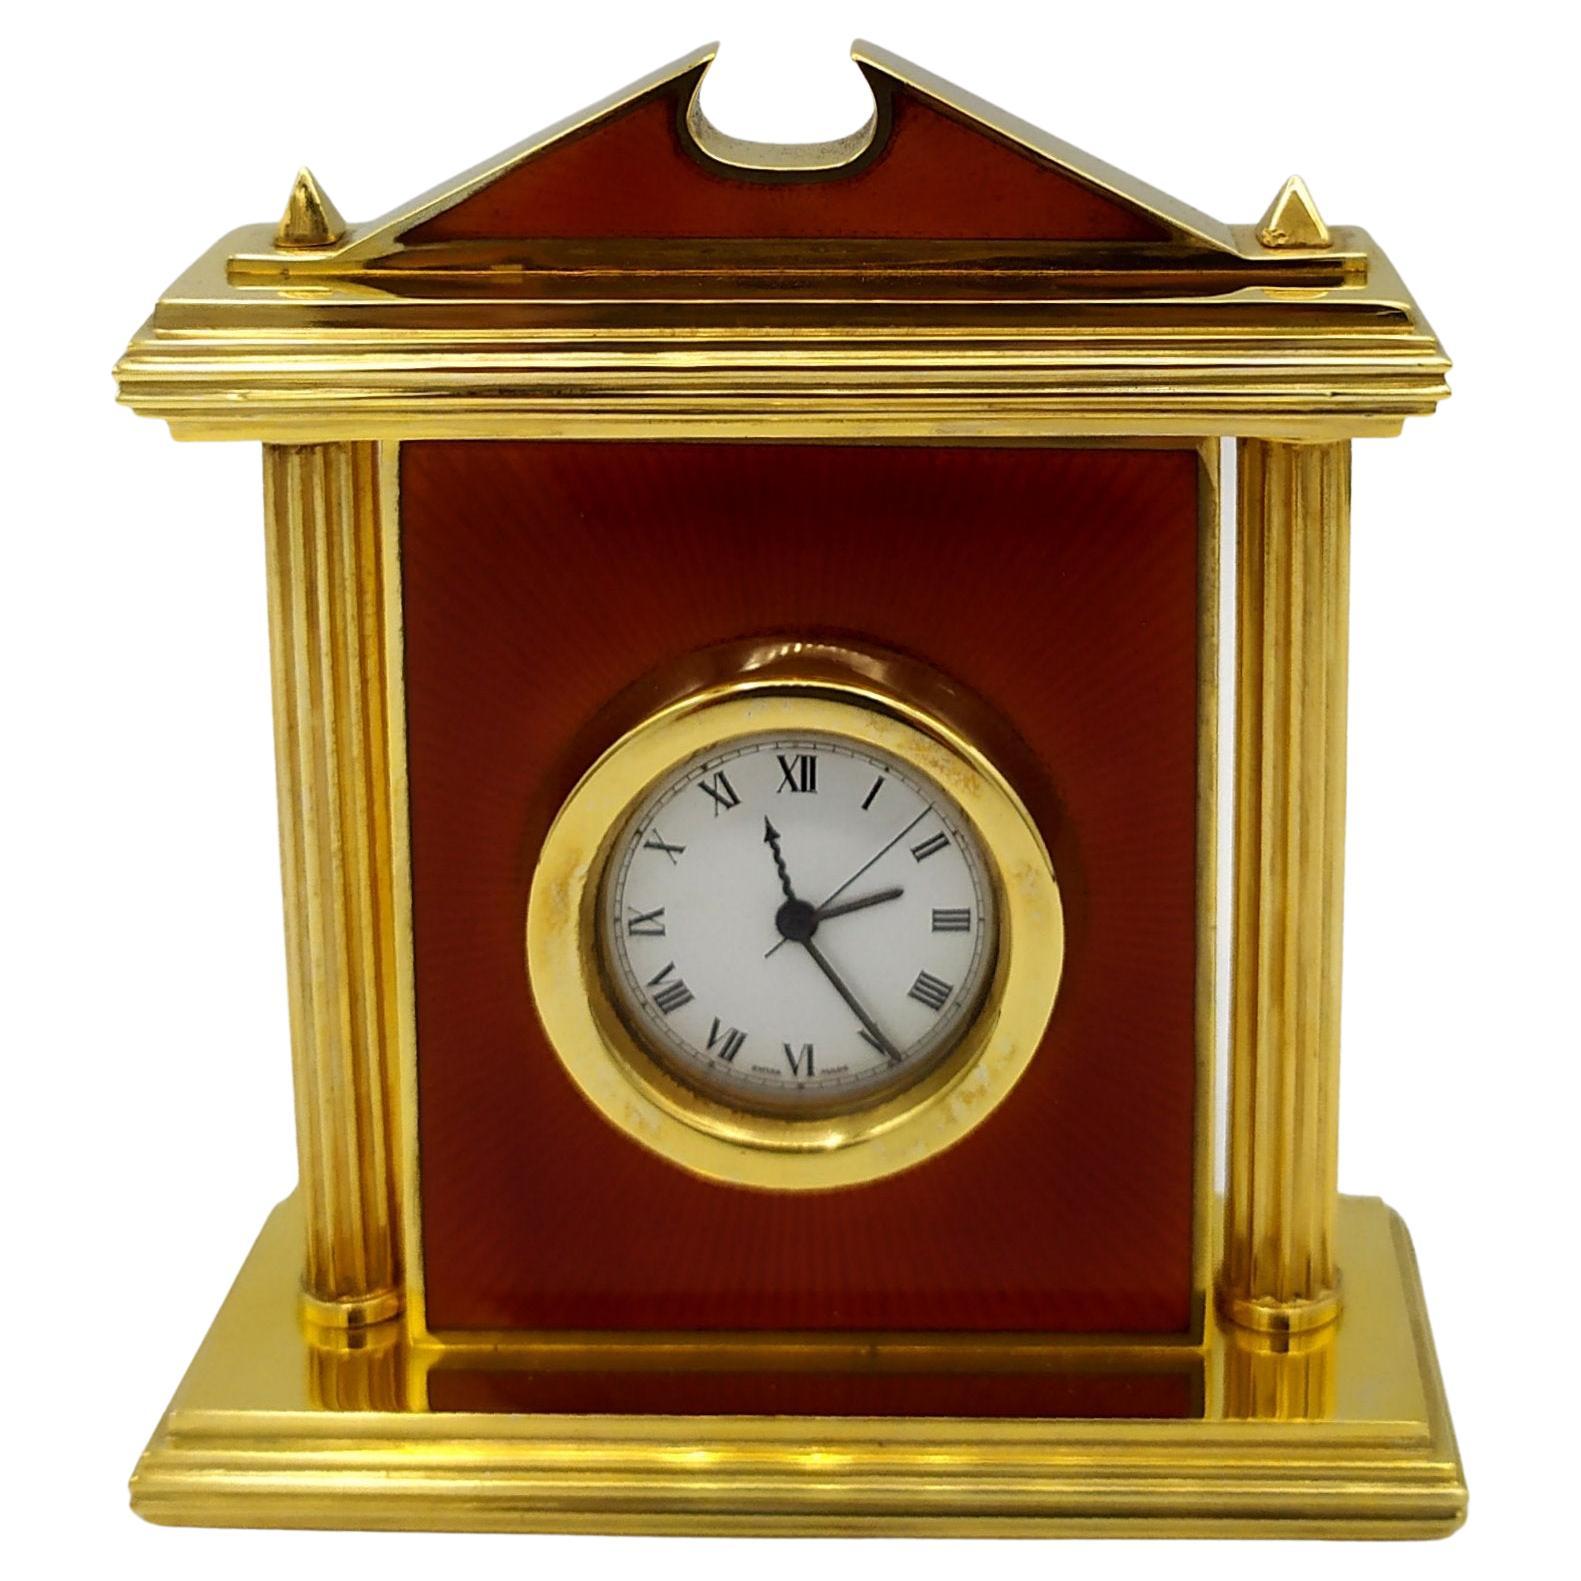 Clock Red fired enamel on guillochè, with columns in Neoclassico Salimbeni. Small gold-plated 925/1000 sterling silver table clock with translucent fired enamel on guillochè, with columns in neo-classical Hellenic style. Swiss mechanical movement